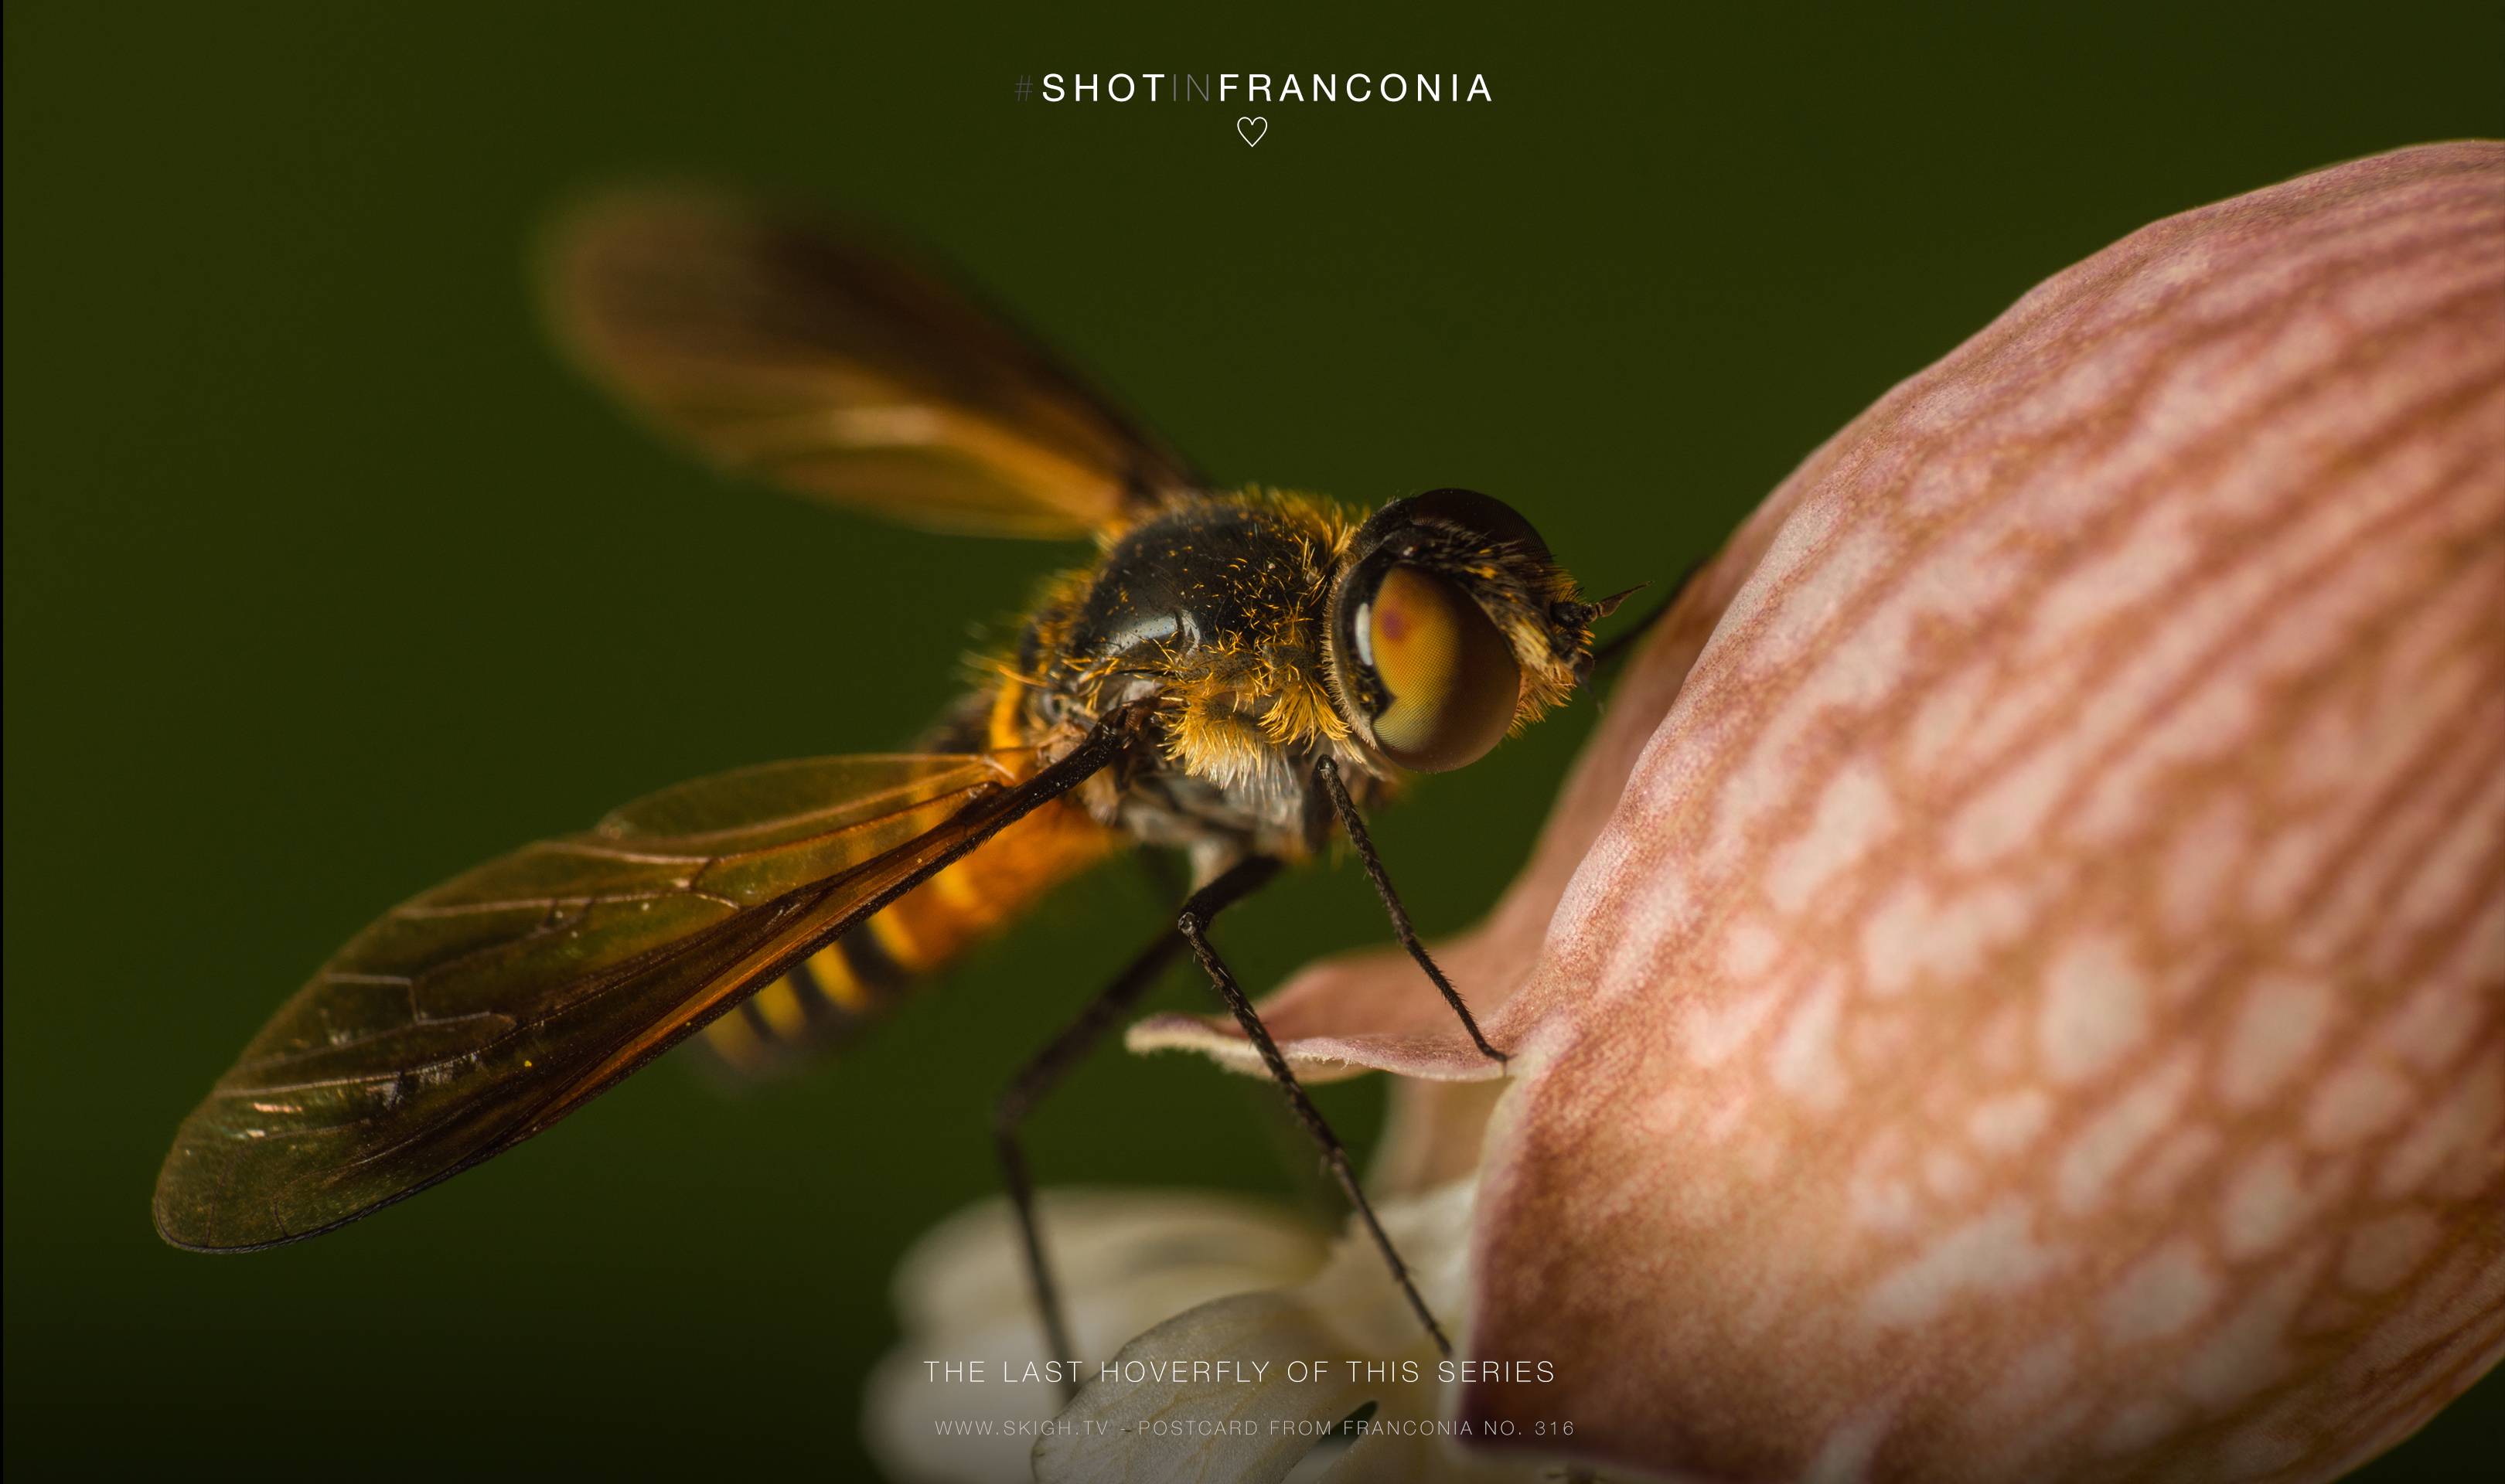 The last hoverfly of this series 